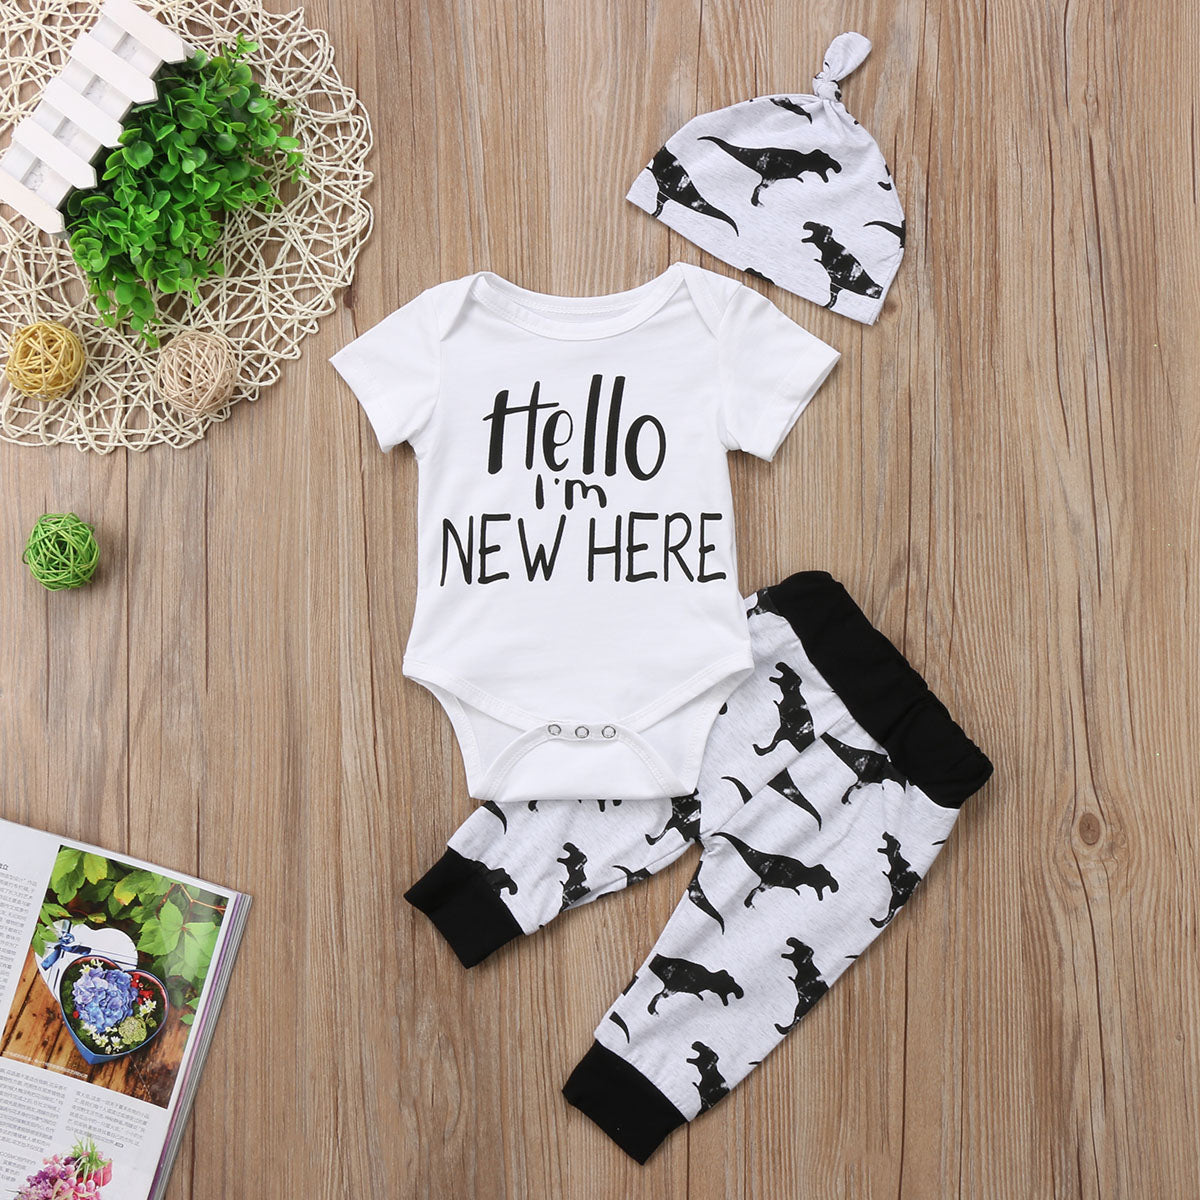 Fashion Letter Newborn Baby Kids Boys Girls Short Sleeve Clothes Dinosaur Romper Tops+Long Pants+Hat Outfit 0-24M - ebowsos